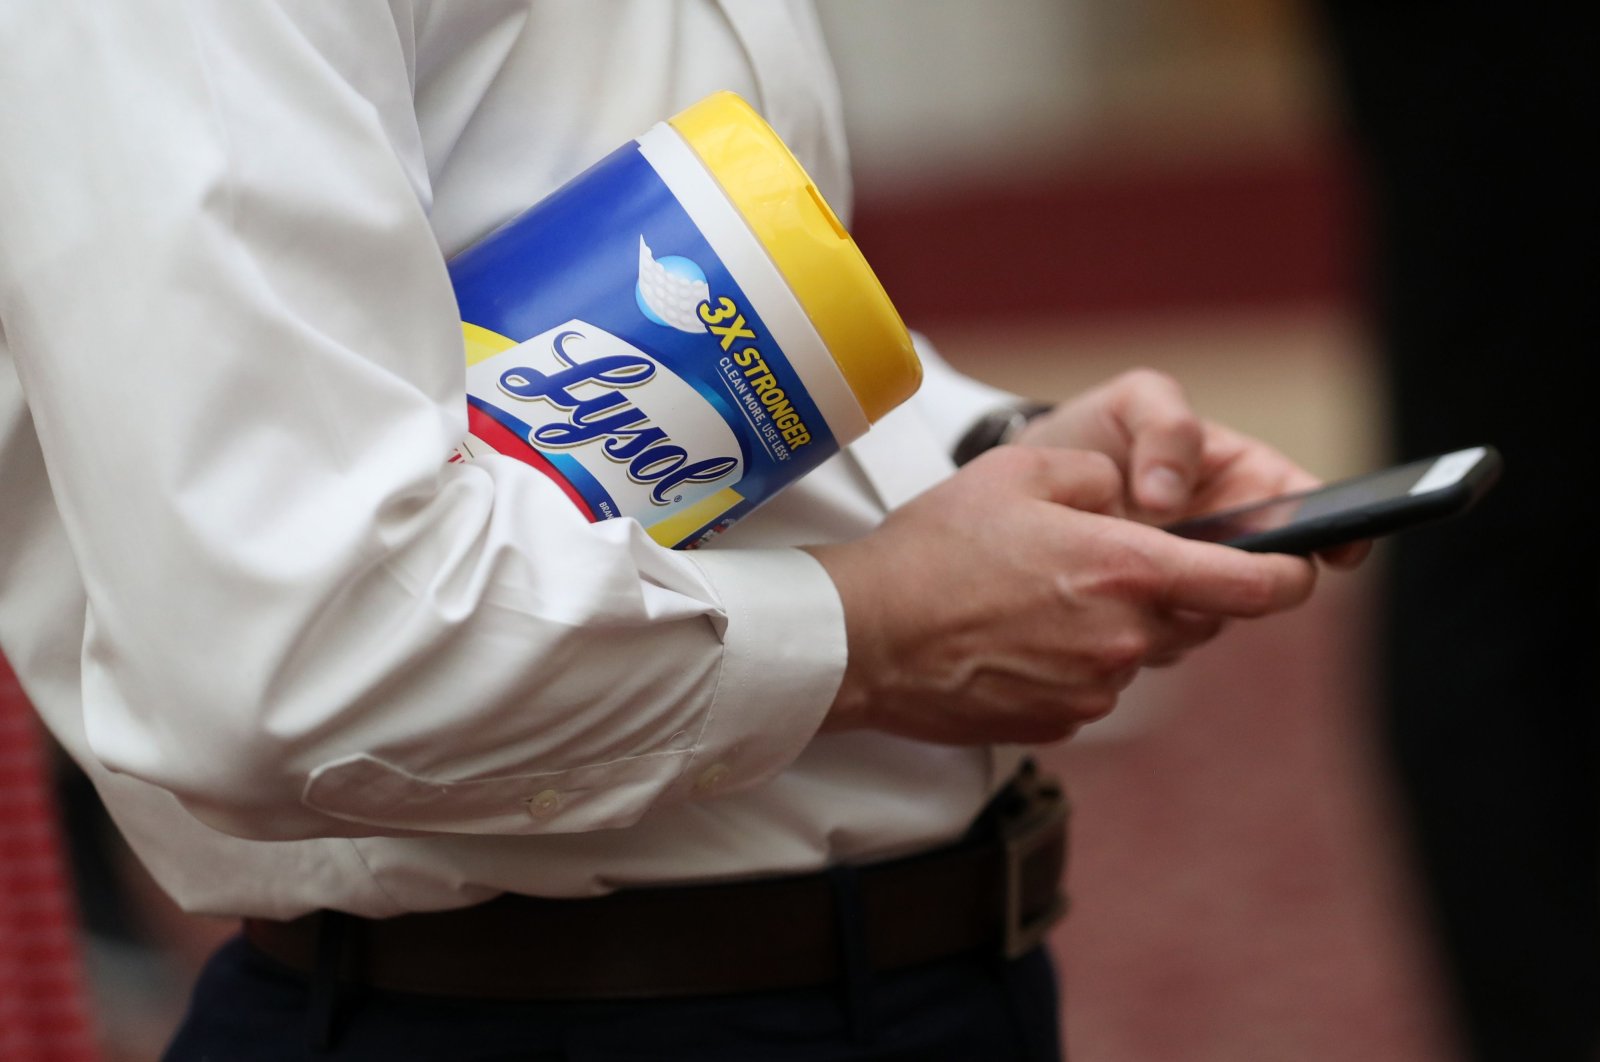  In this file photo taken on March 16, 2020, an attendee holds a container of Lysol disinfecting wipes during a press conference at San Francisco City Hall by Mayor London Breed. (AFP Photo)